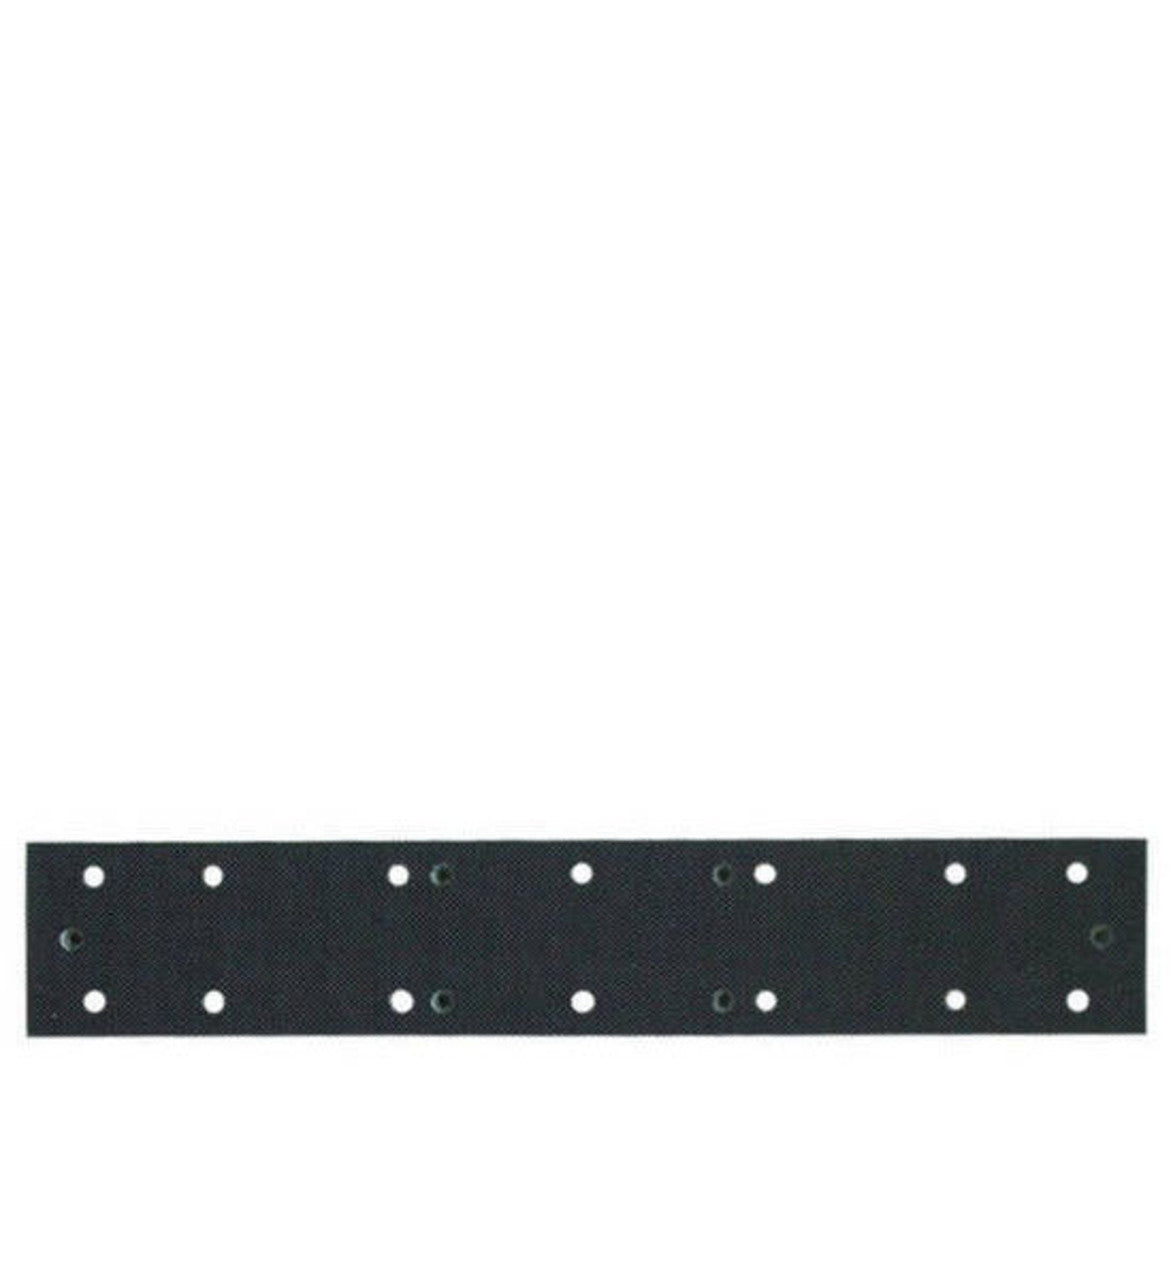 Rupes 70MM x 400MM Velcro Replacement Backing Pad - 619.153